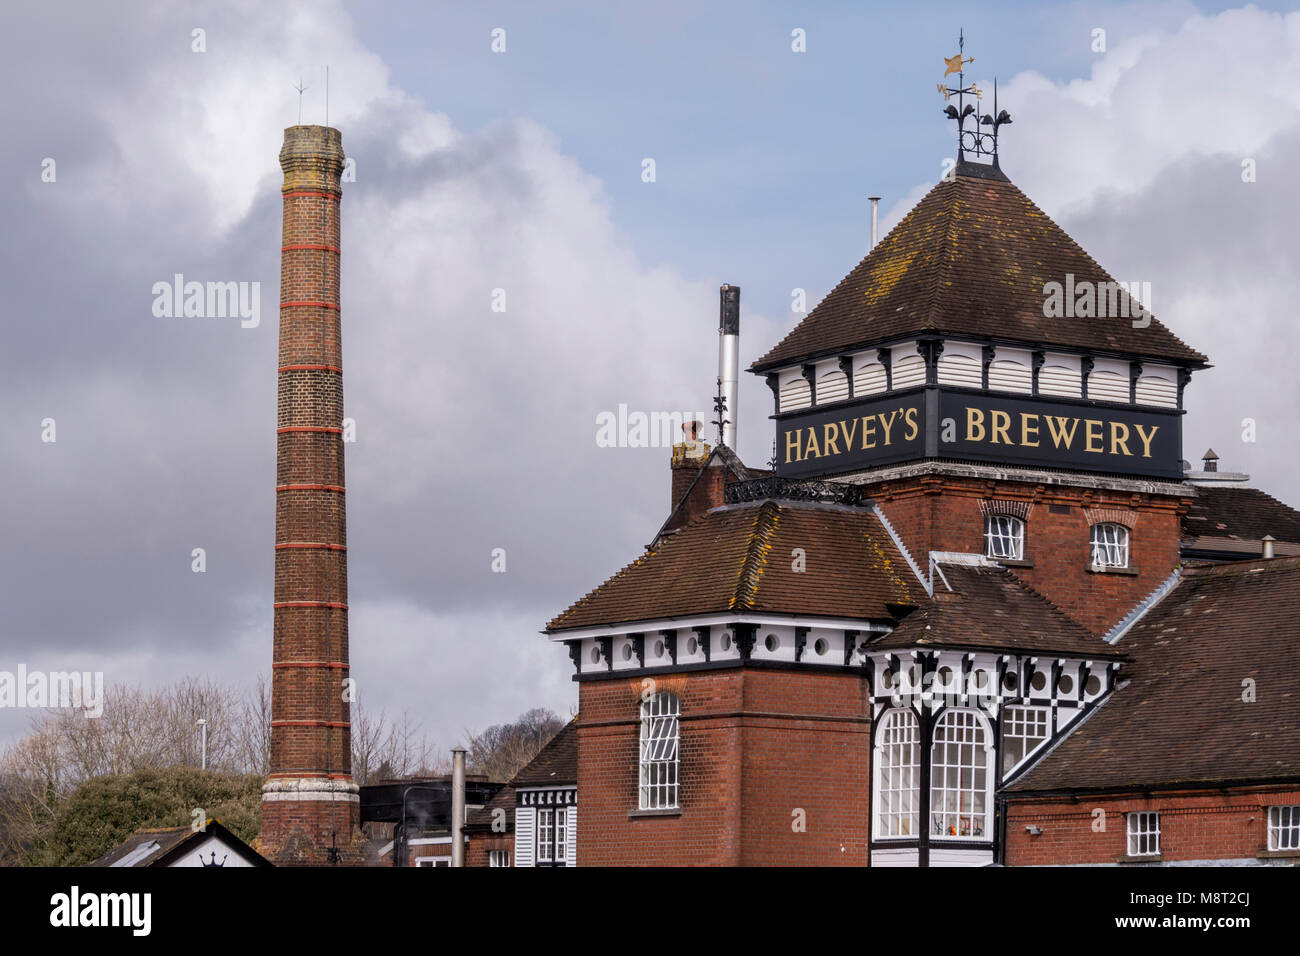 Harvey's brewery - Lewes, East Sussex, England, UK. Stock Photo